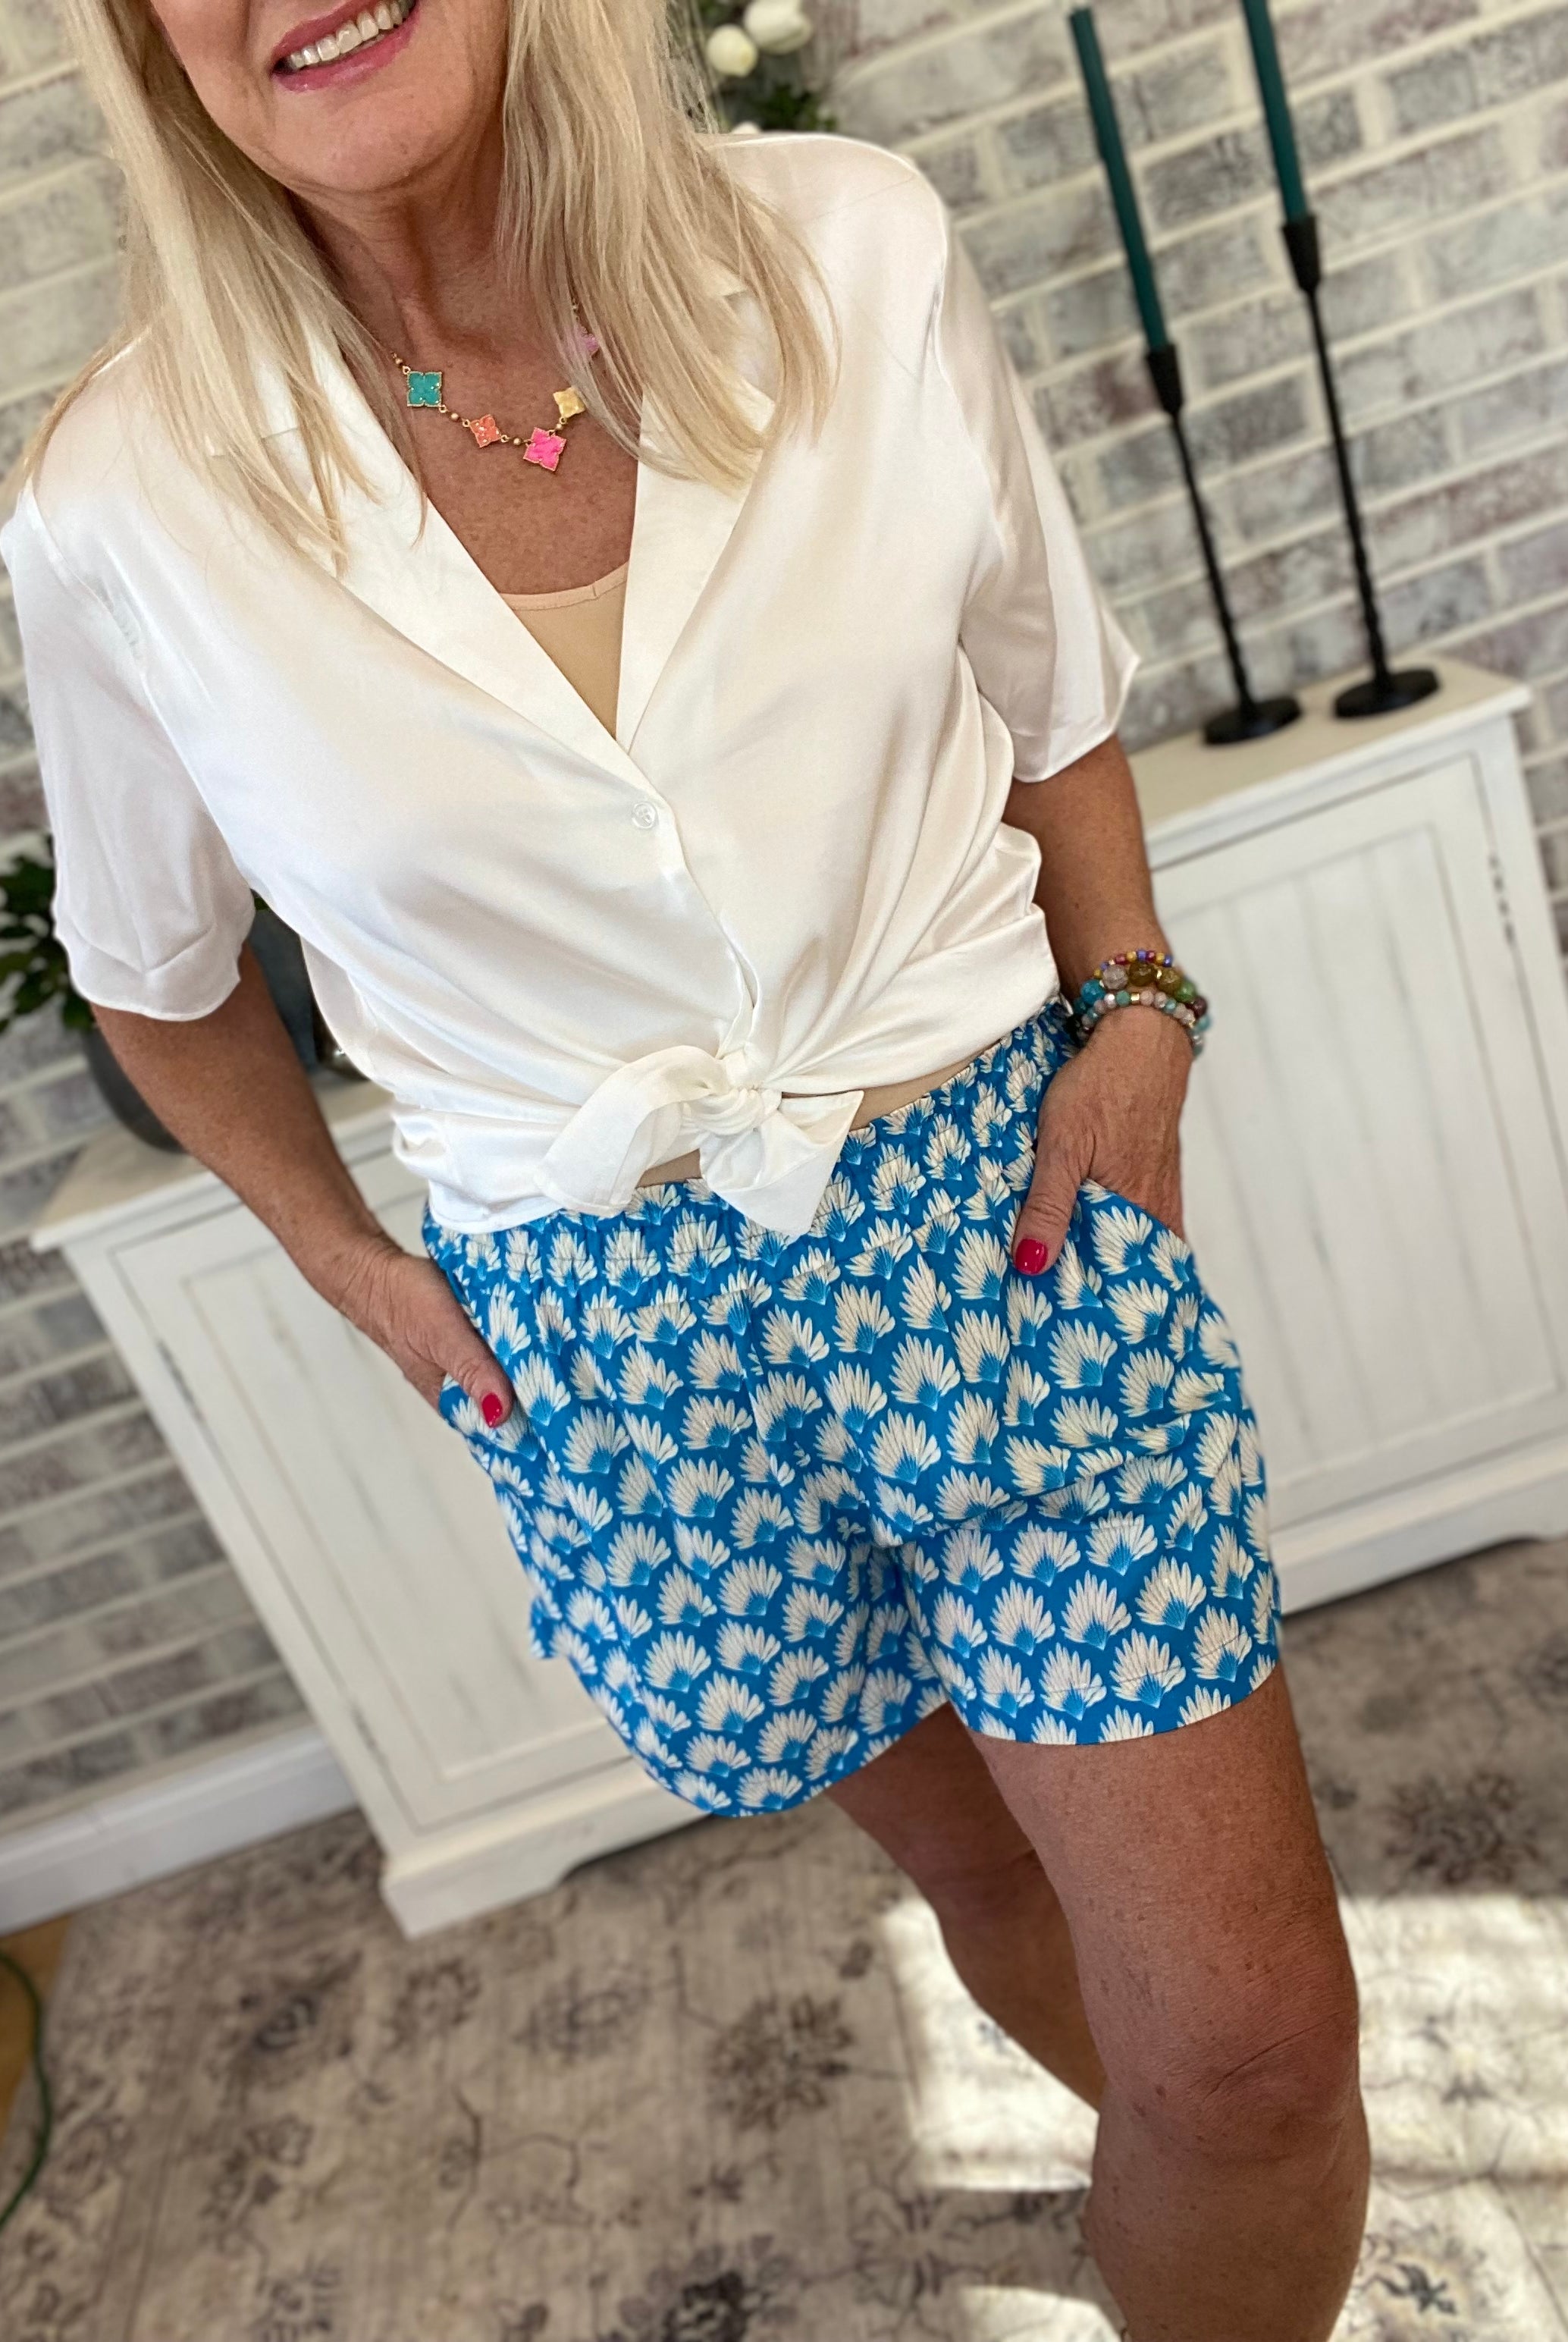 Brighter Days Shorts-230 Skirts/Shorts-The Lovely Closet-The Lovely Closet, Women's Fashion Boutique in Alexandria, KY